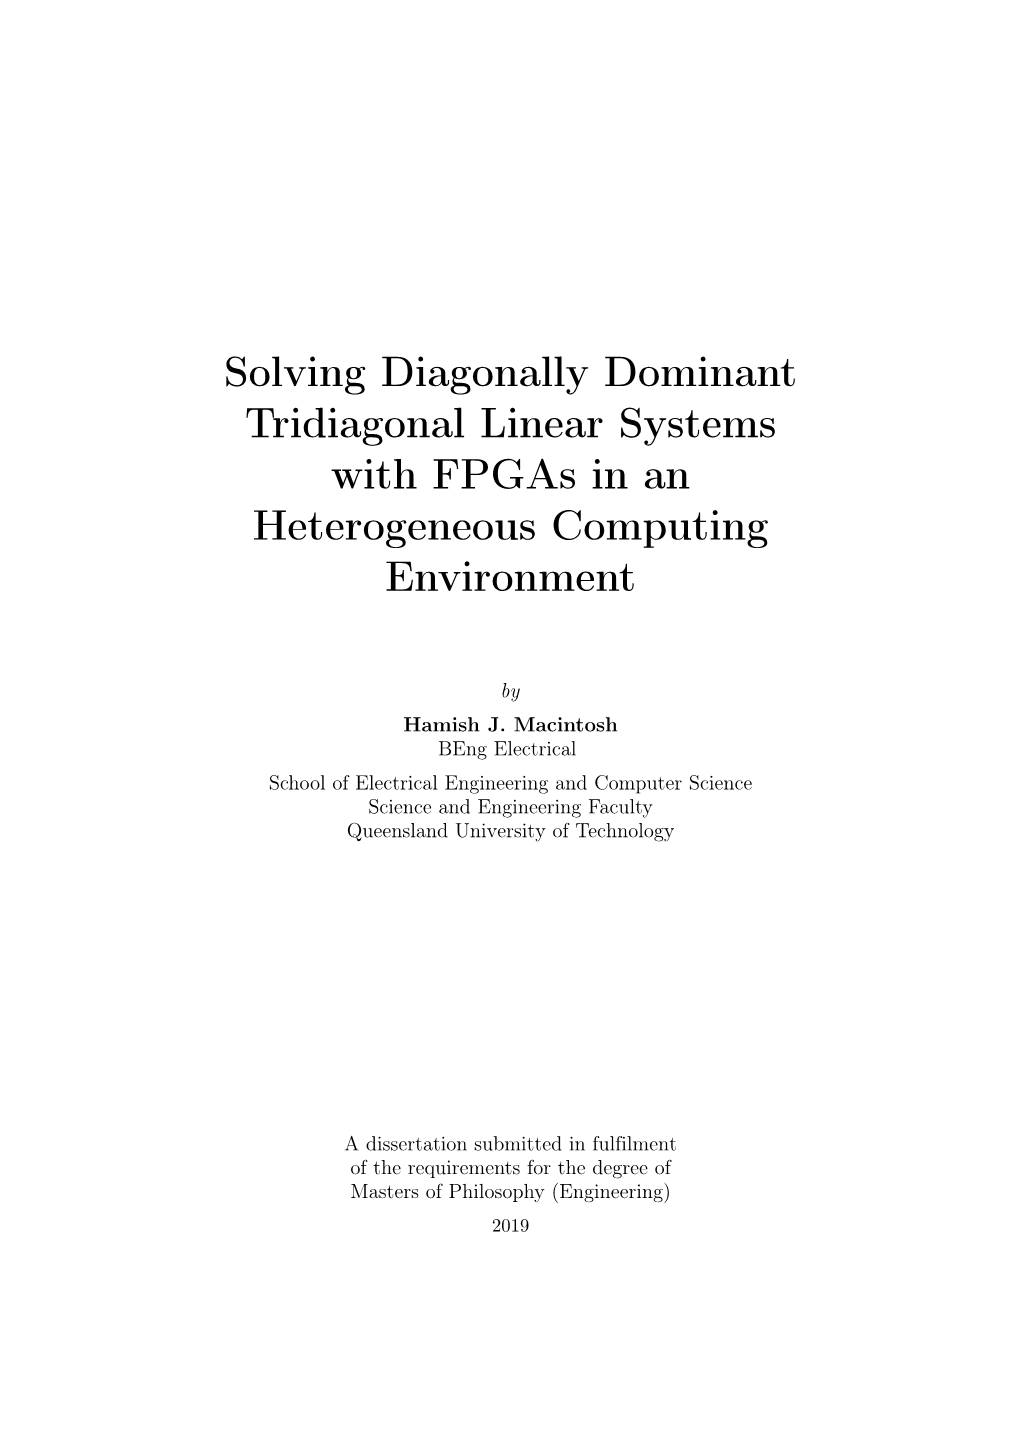 Solving Diagonally Dominant Tridiagonal Linear Systems with Fpgas in an Heterogeneous Computing Environment